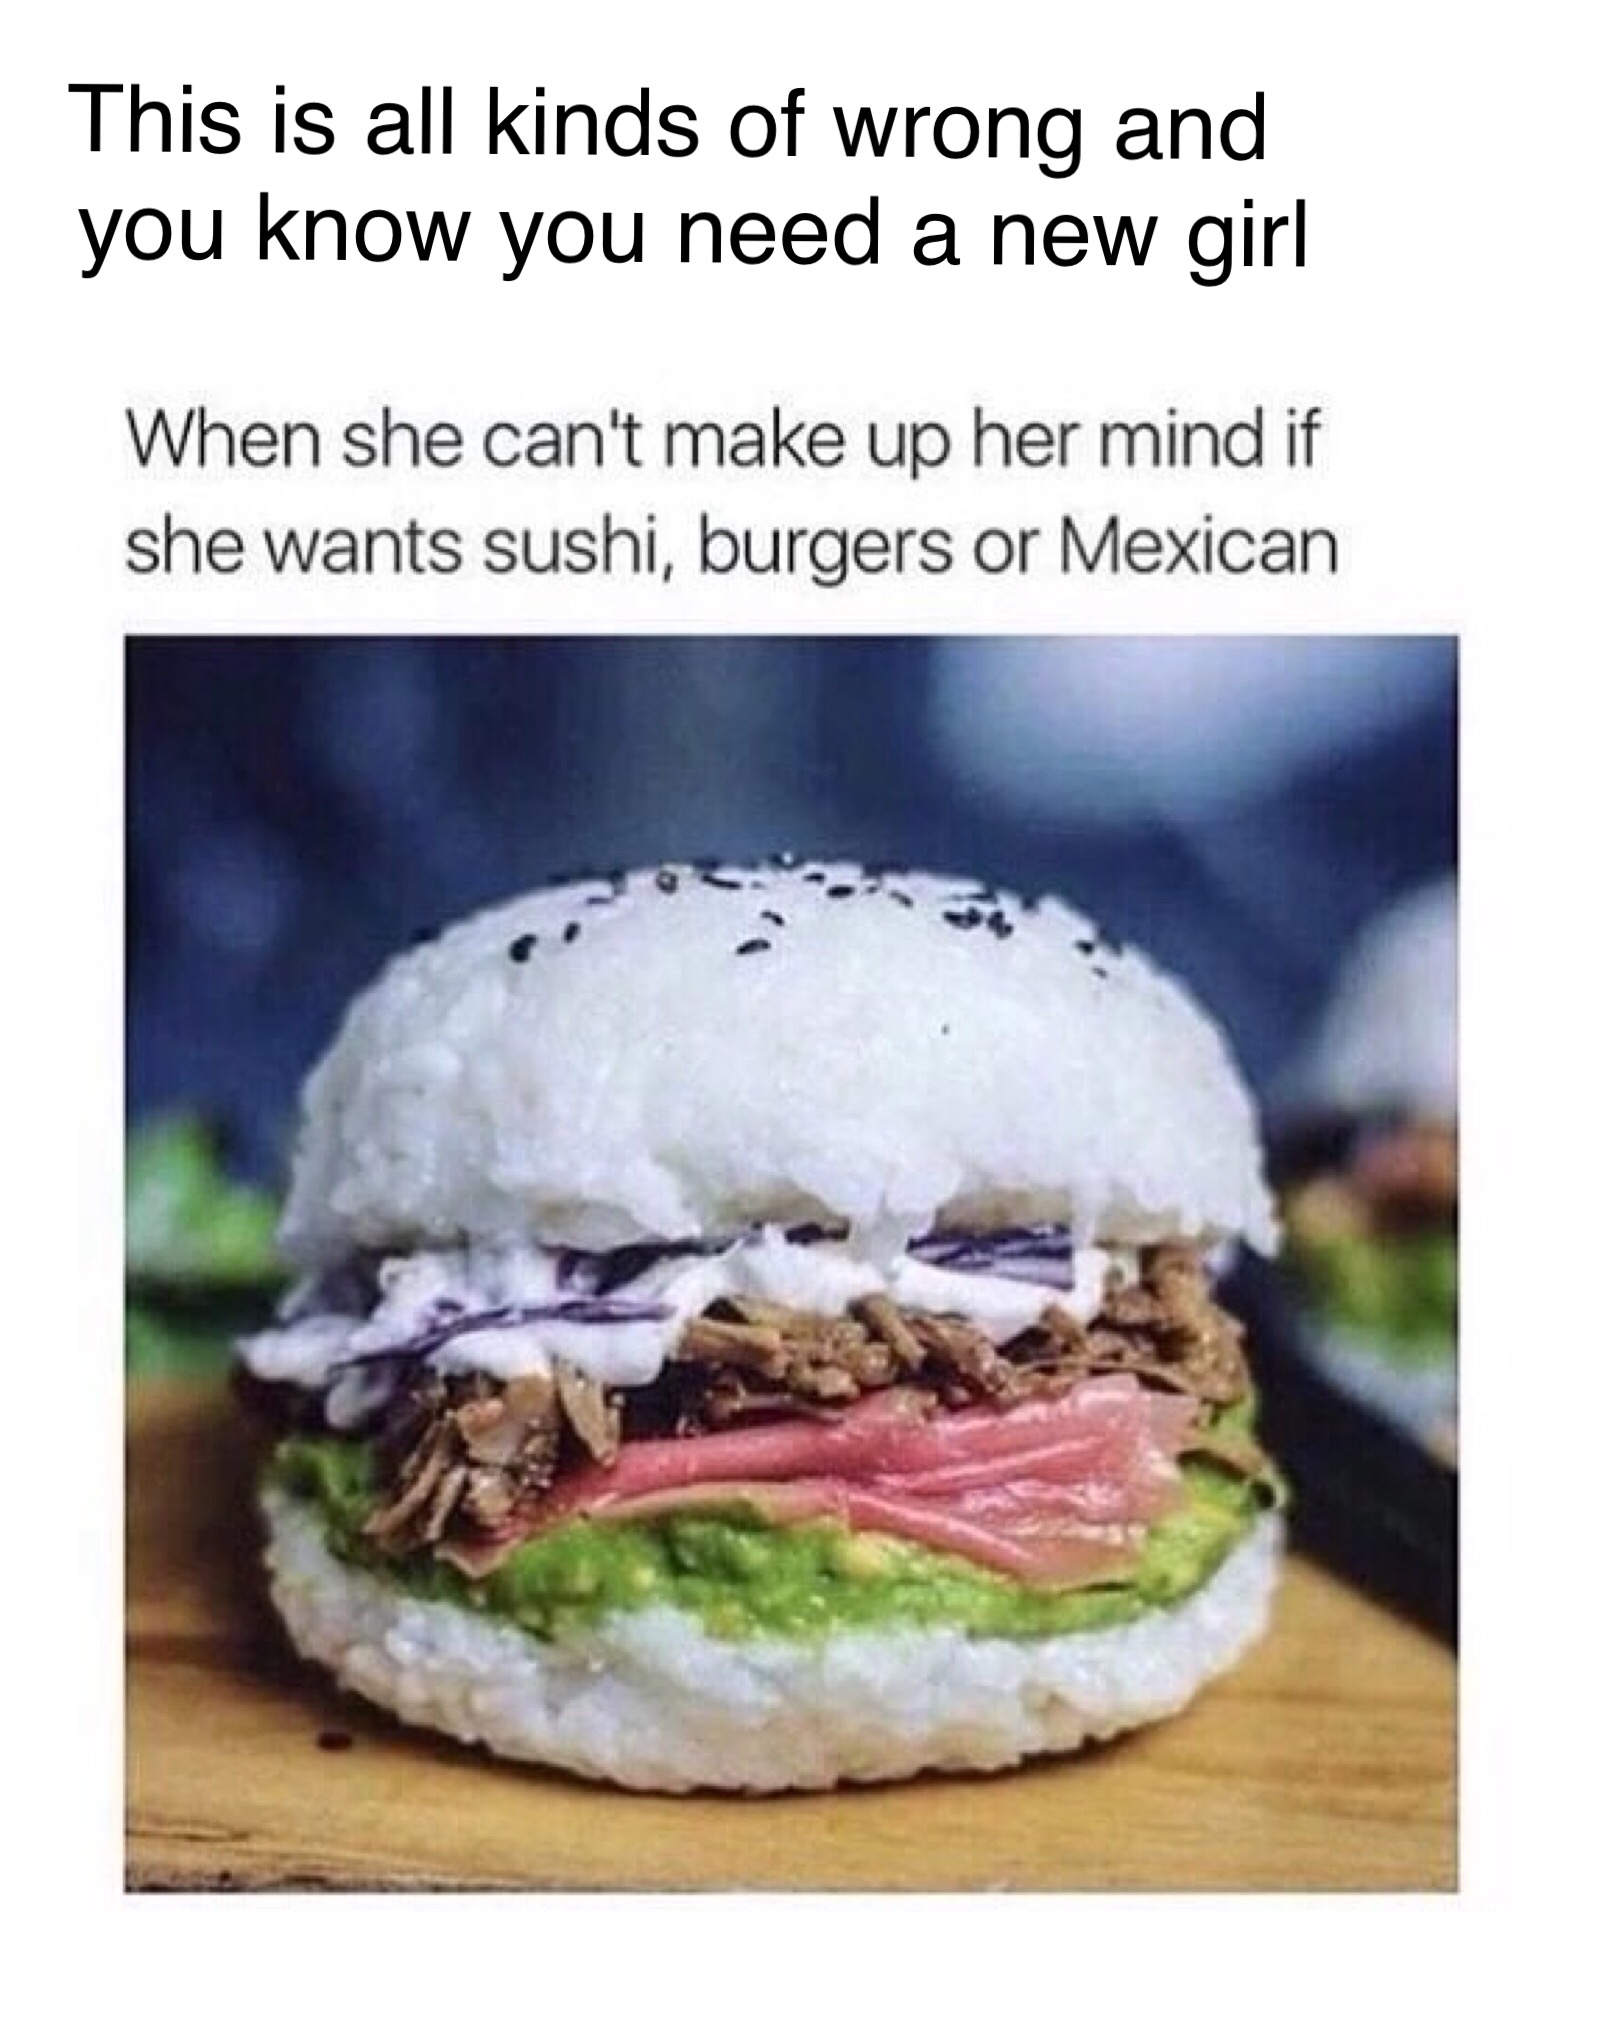 This is all kinds of wrong and you know you need a new girl When she can't make up her mind if she wants sushi, burgers or Mexican